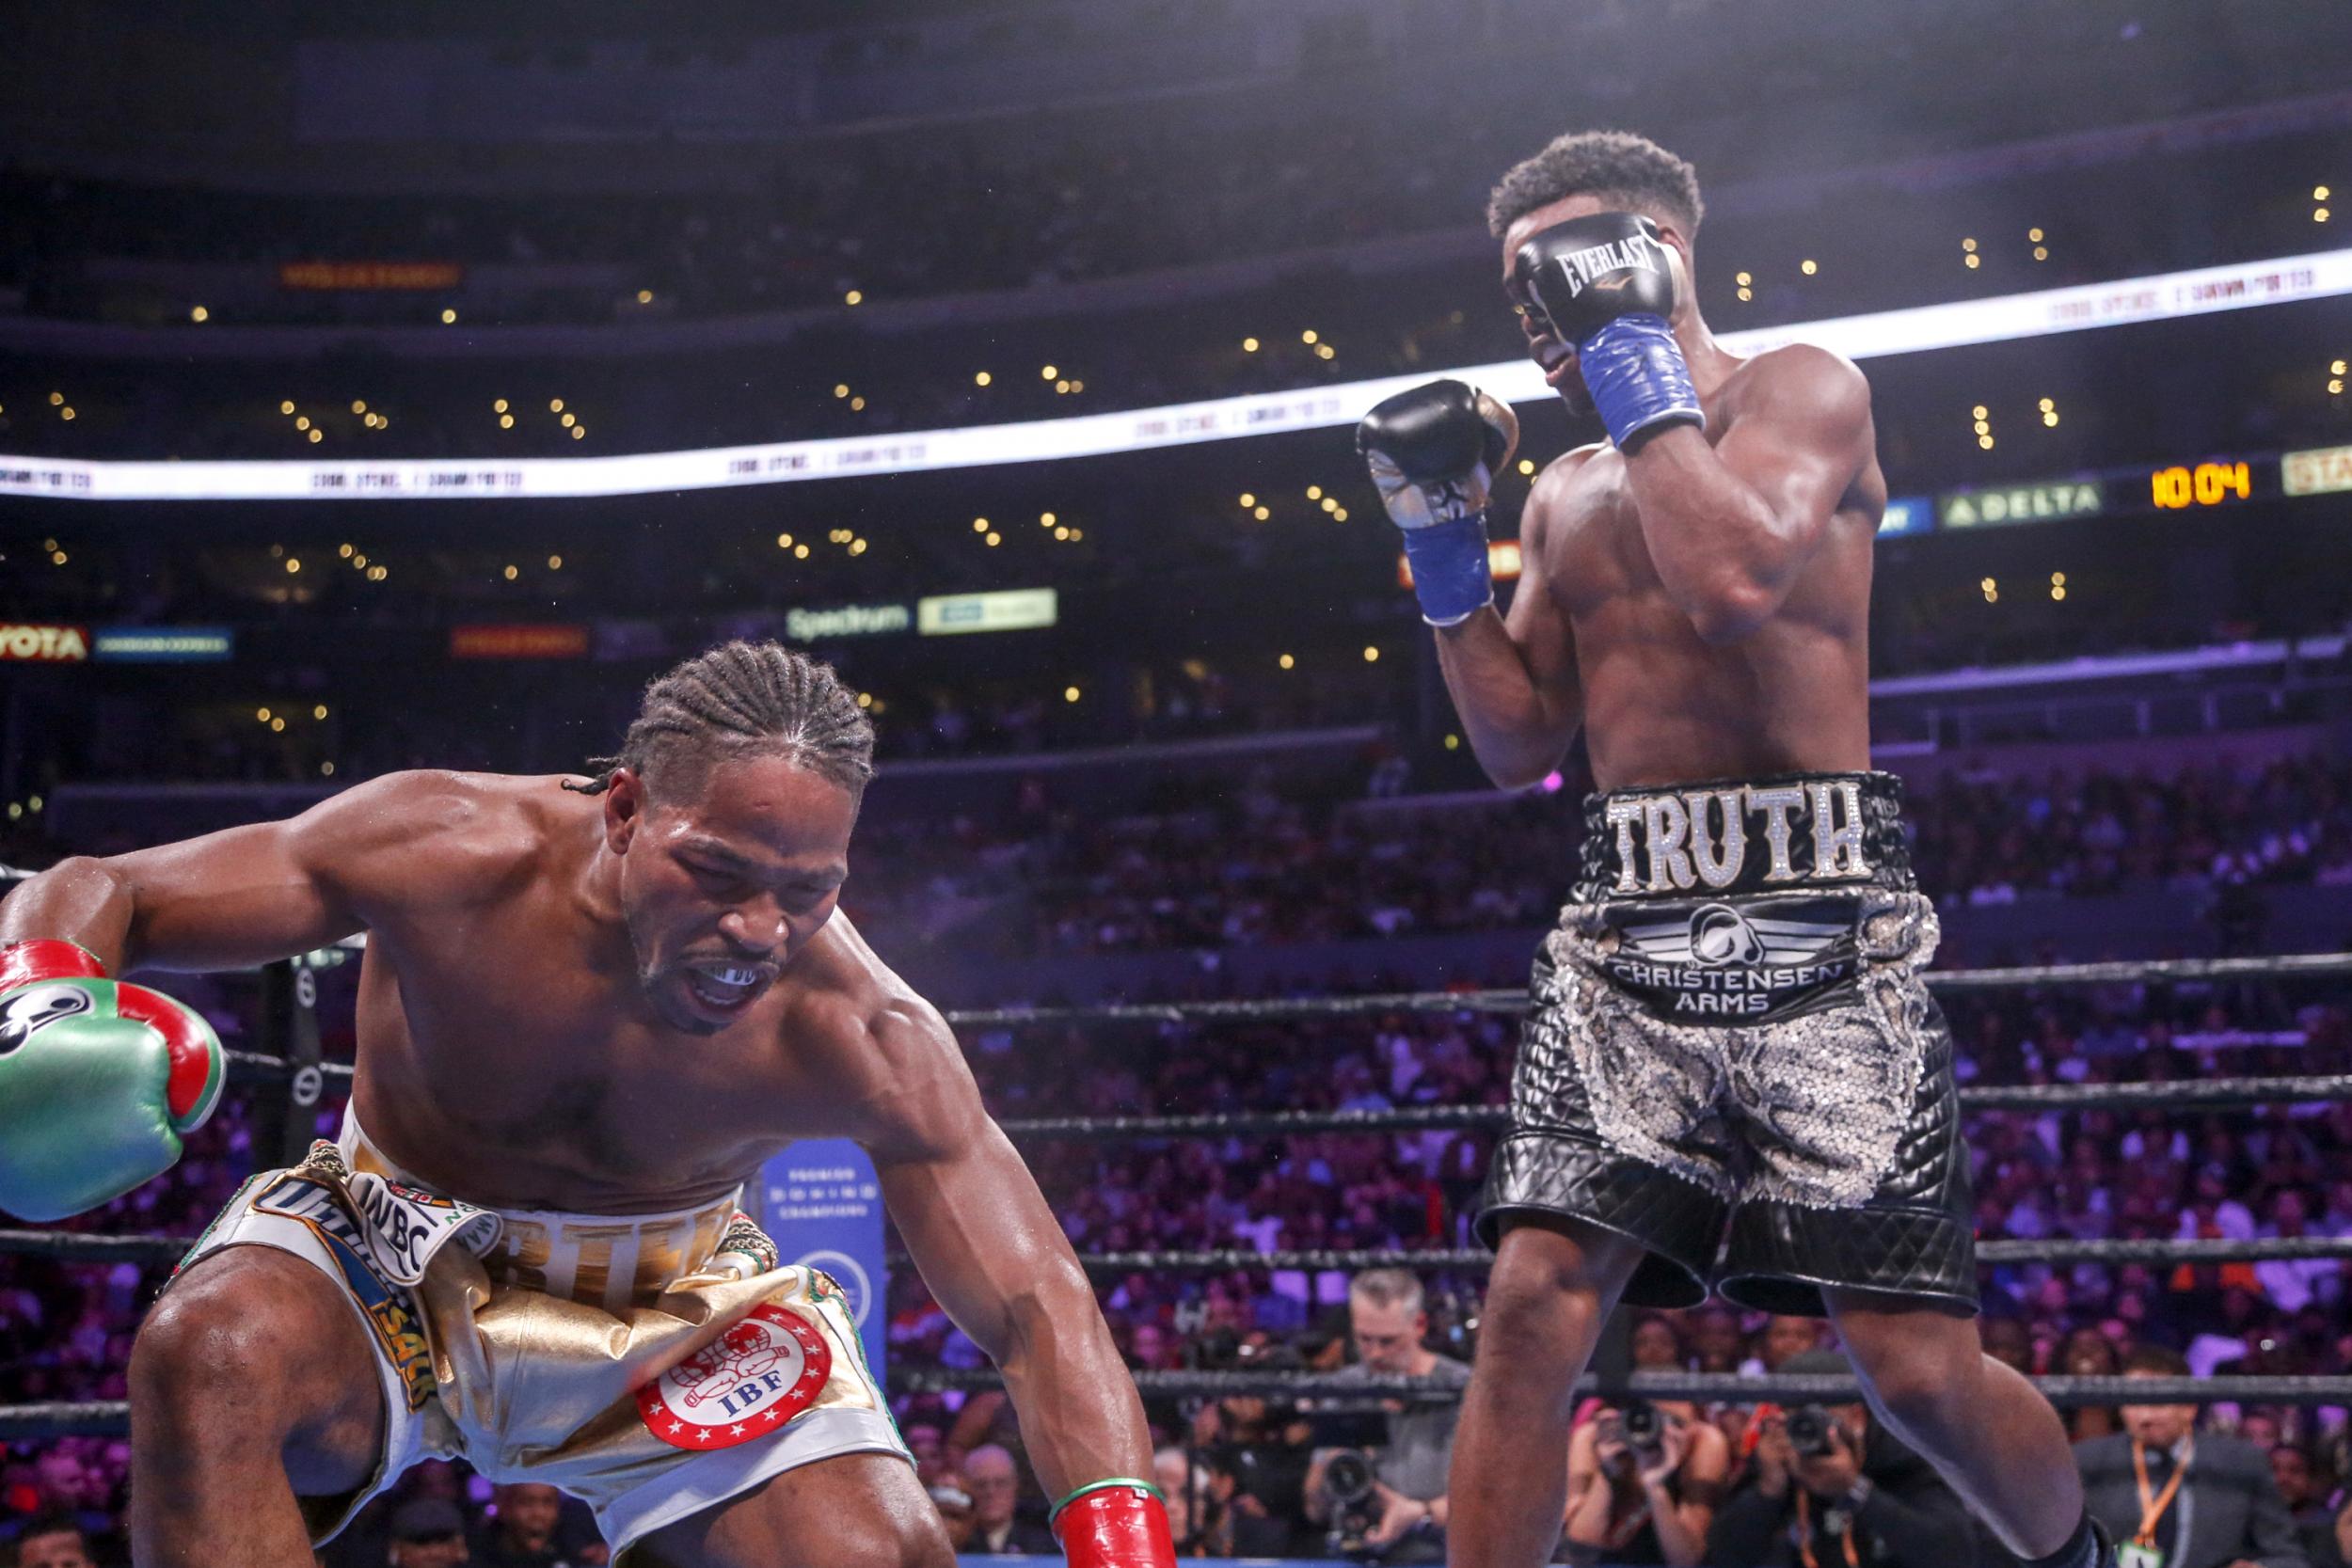 As judges Ray Danseco and Steve Weisfeld scored, Errol Spence Jr. was the w...